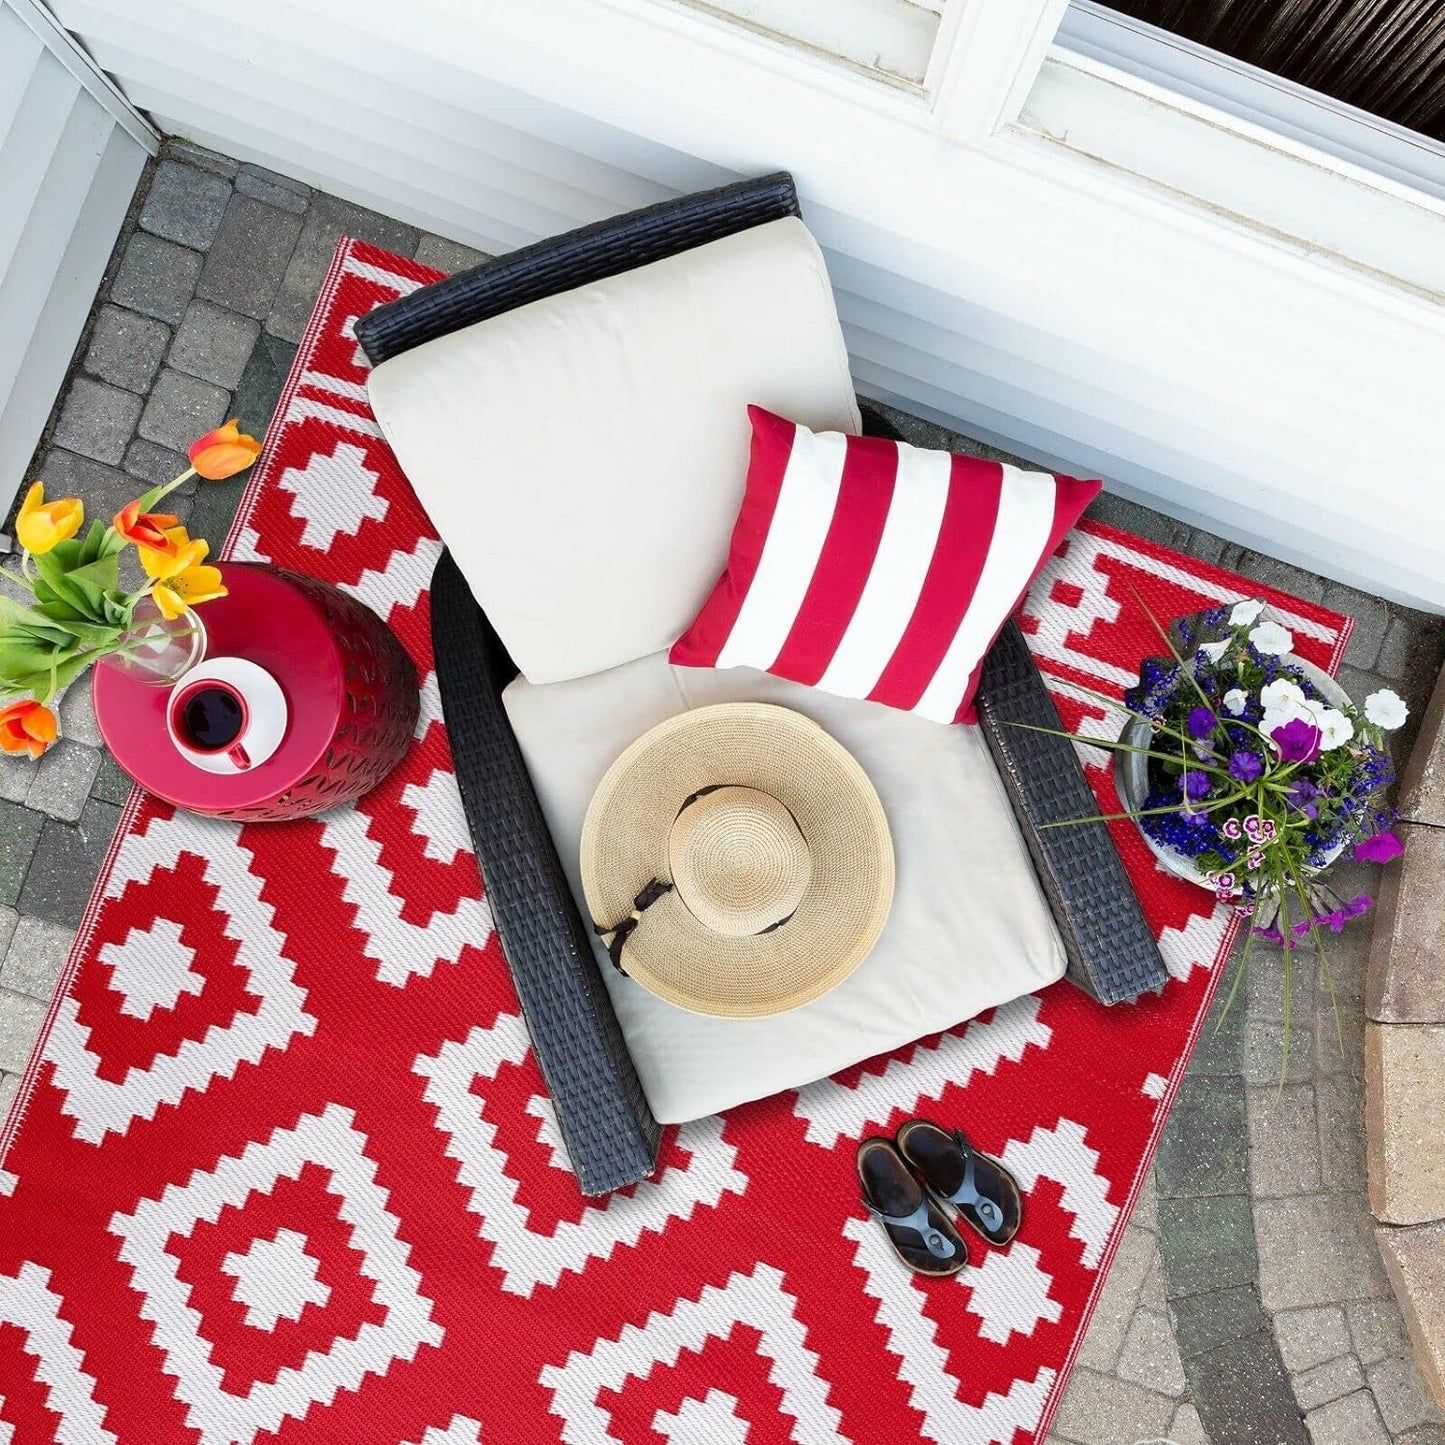 Playa Outdoor Rug - Crease-Free Recycled Plastic Floor Mat for Patio, Camping, Beach, Balcony, Porch, Deck - Weather, Water, Stain, Lightweight, Fade and UV Resistant - Milan- Red & White